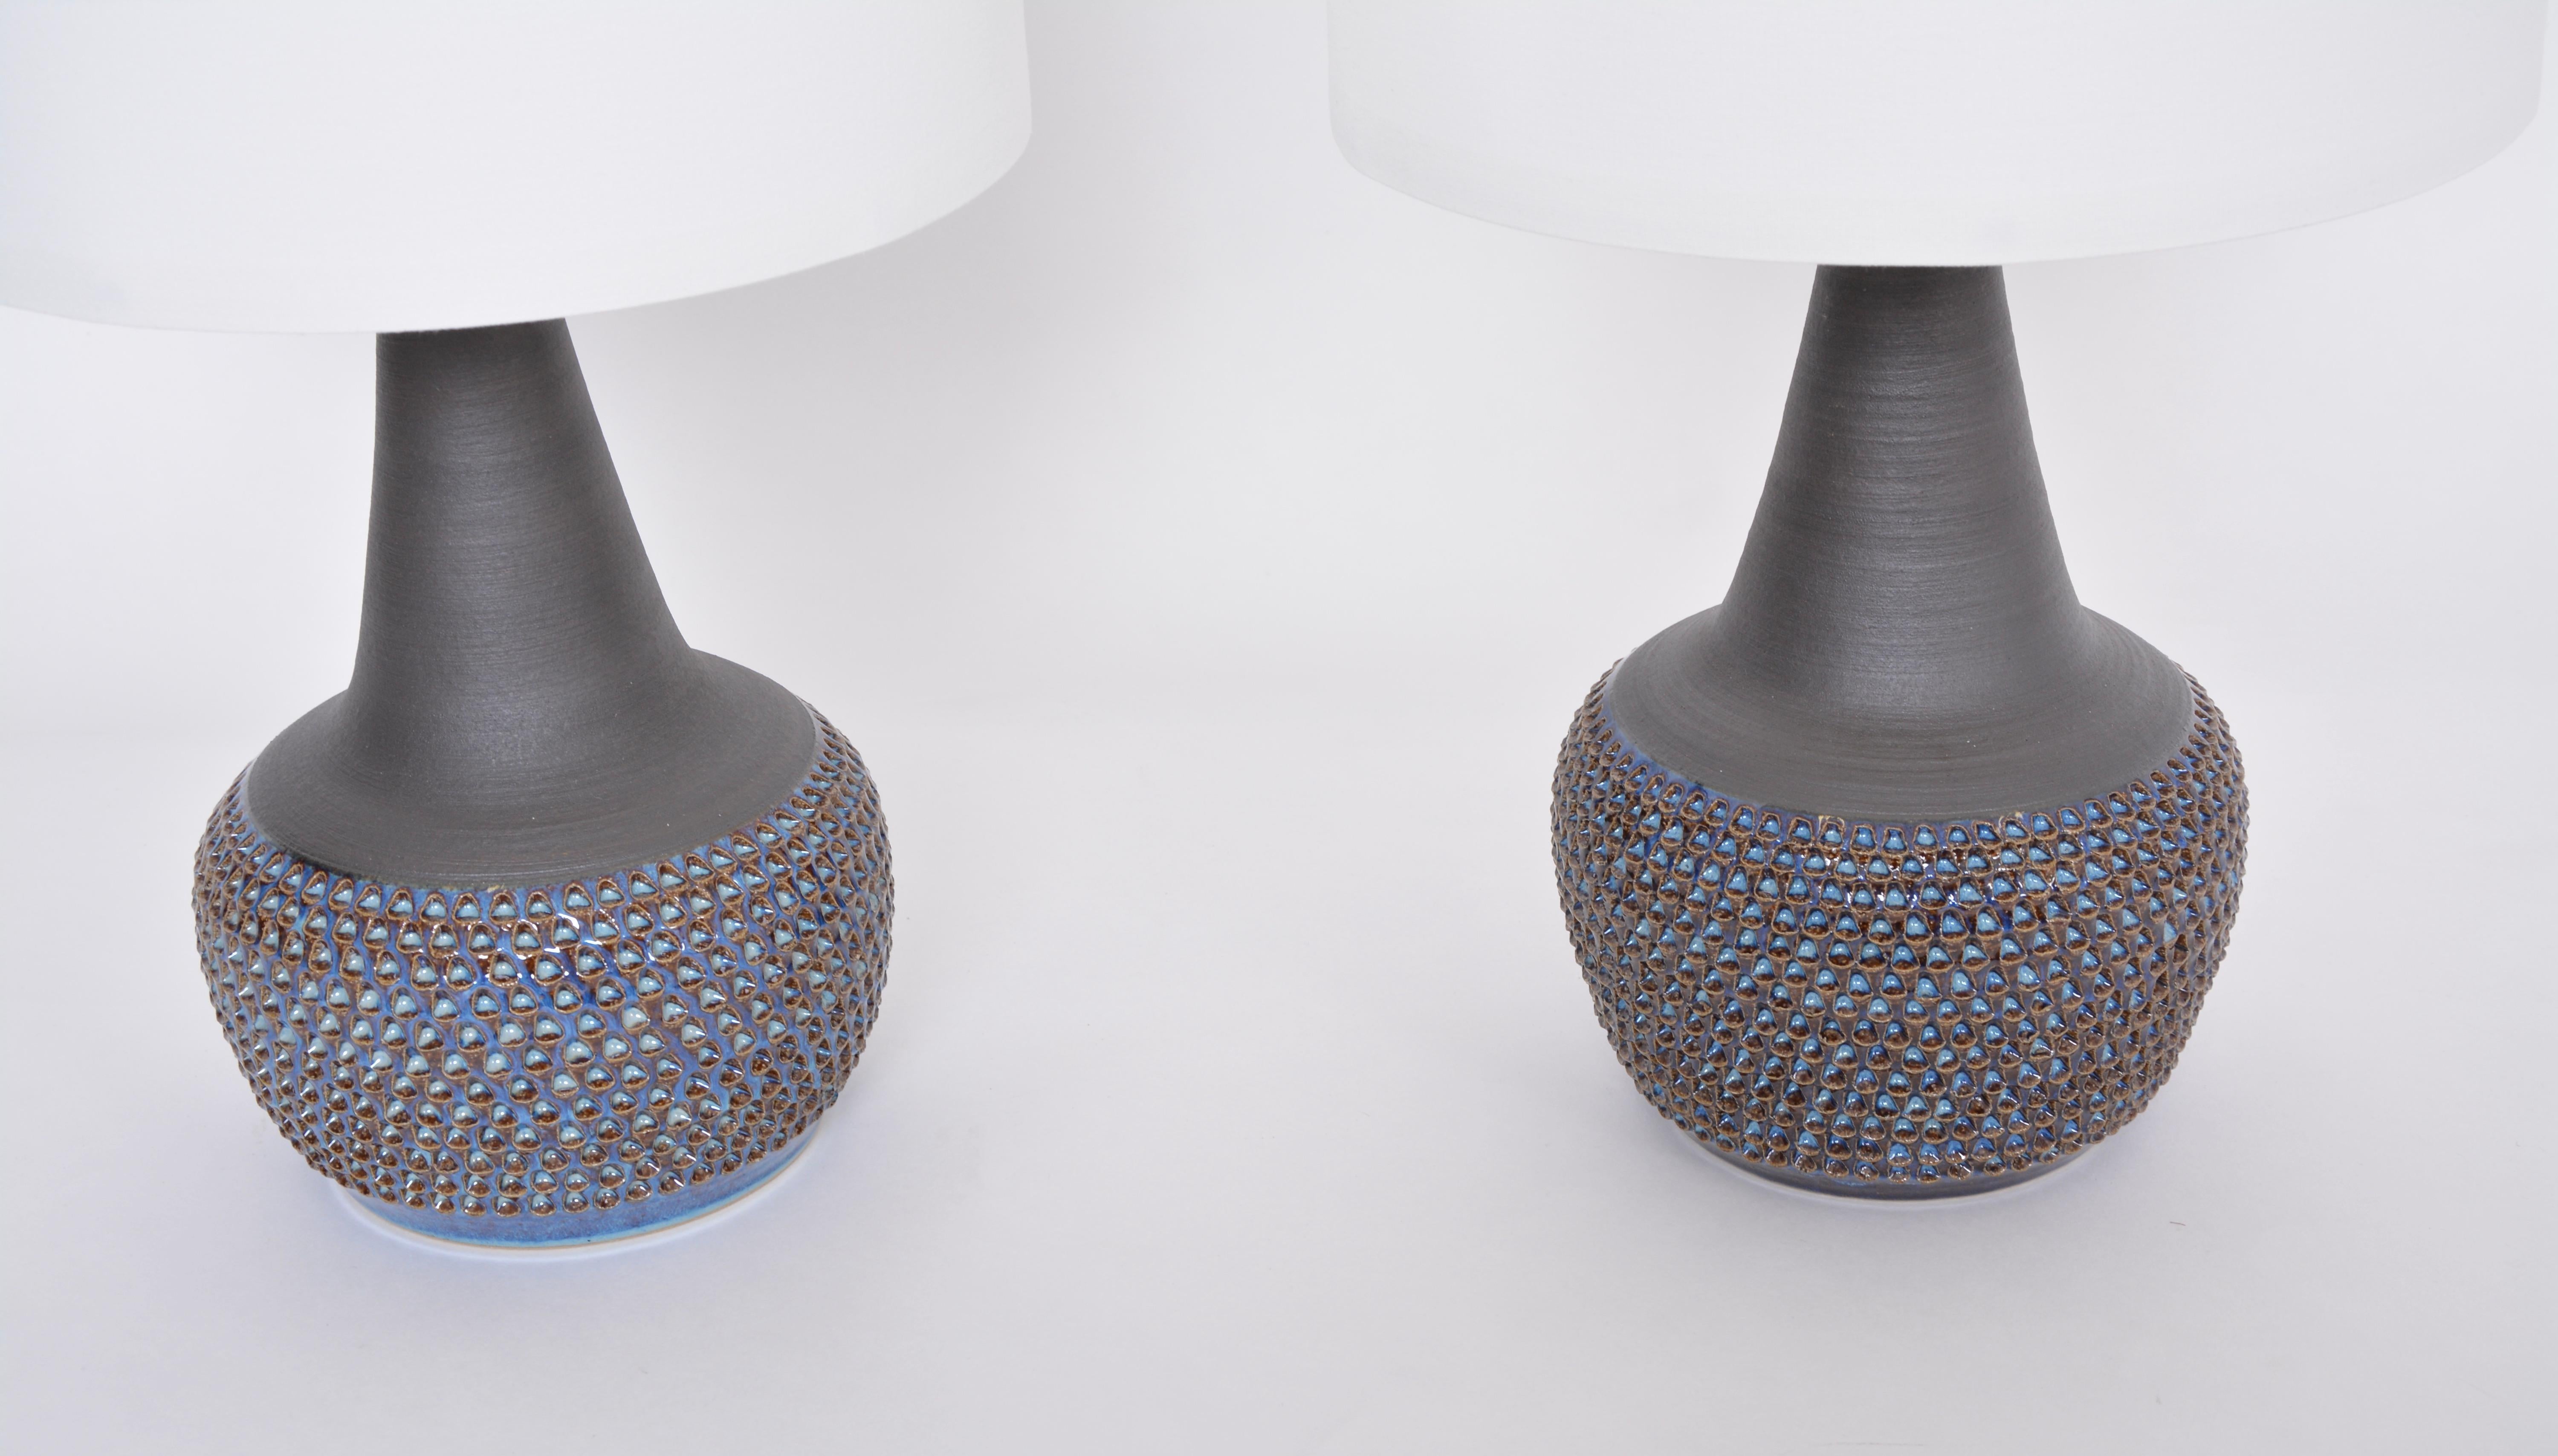 Pair of Handmade Danish midcentury ceramic lamps Model 3048 by Einar Johansen for Soholm
Stunning table lamps handmade of stoneware with ceramic glazing in different tones of blue. Pattern made of circular incisions to the base of the lamps.